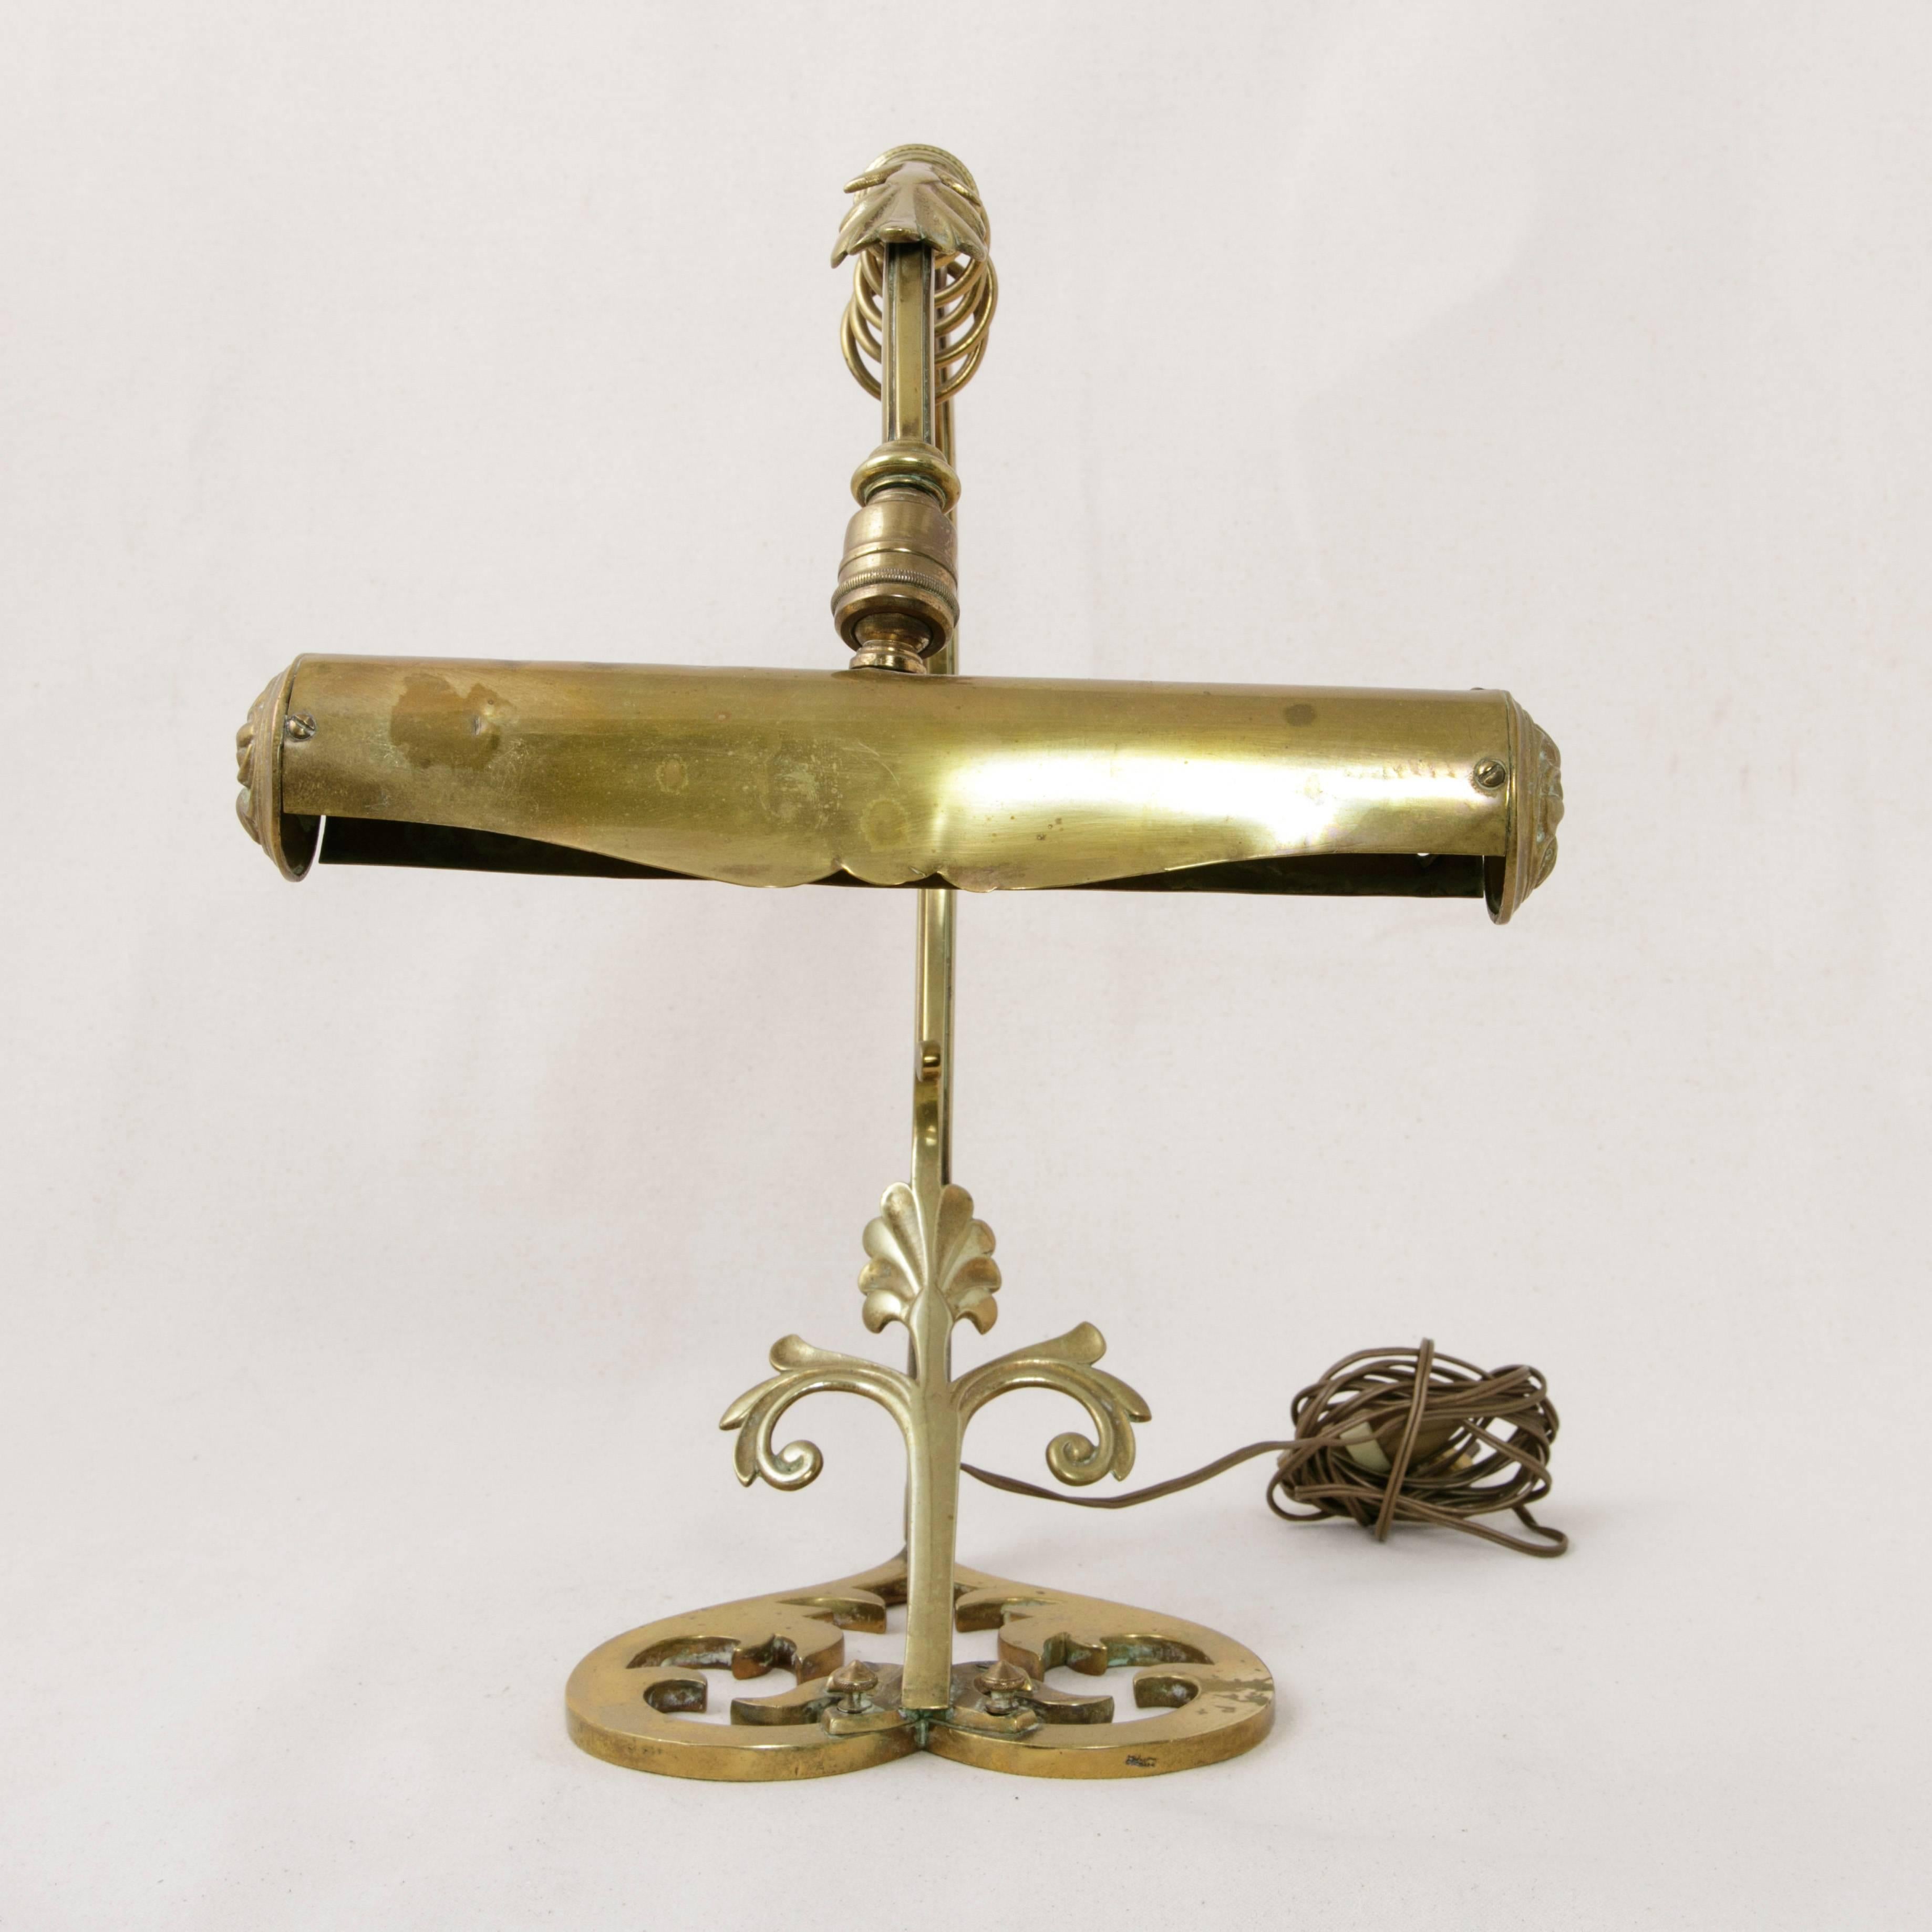 A rare find, this Art Nouveau period bronze lamp was created to light music at a piano, but also makes a lovely formal desk lamp. A scrollwork and leaf motif is carried across its base and up its curved arm. The design in the bronzework base stands